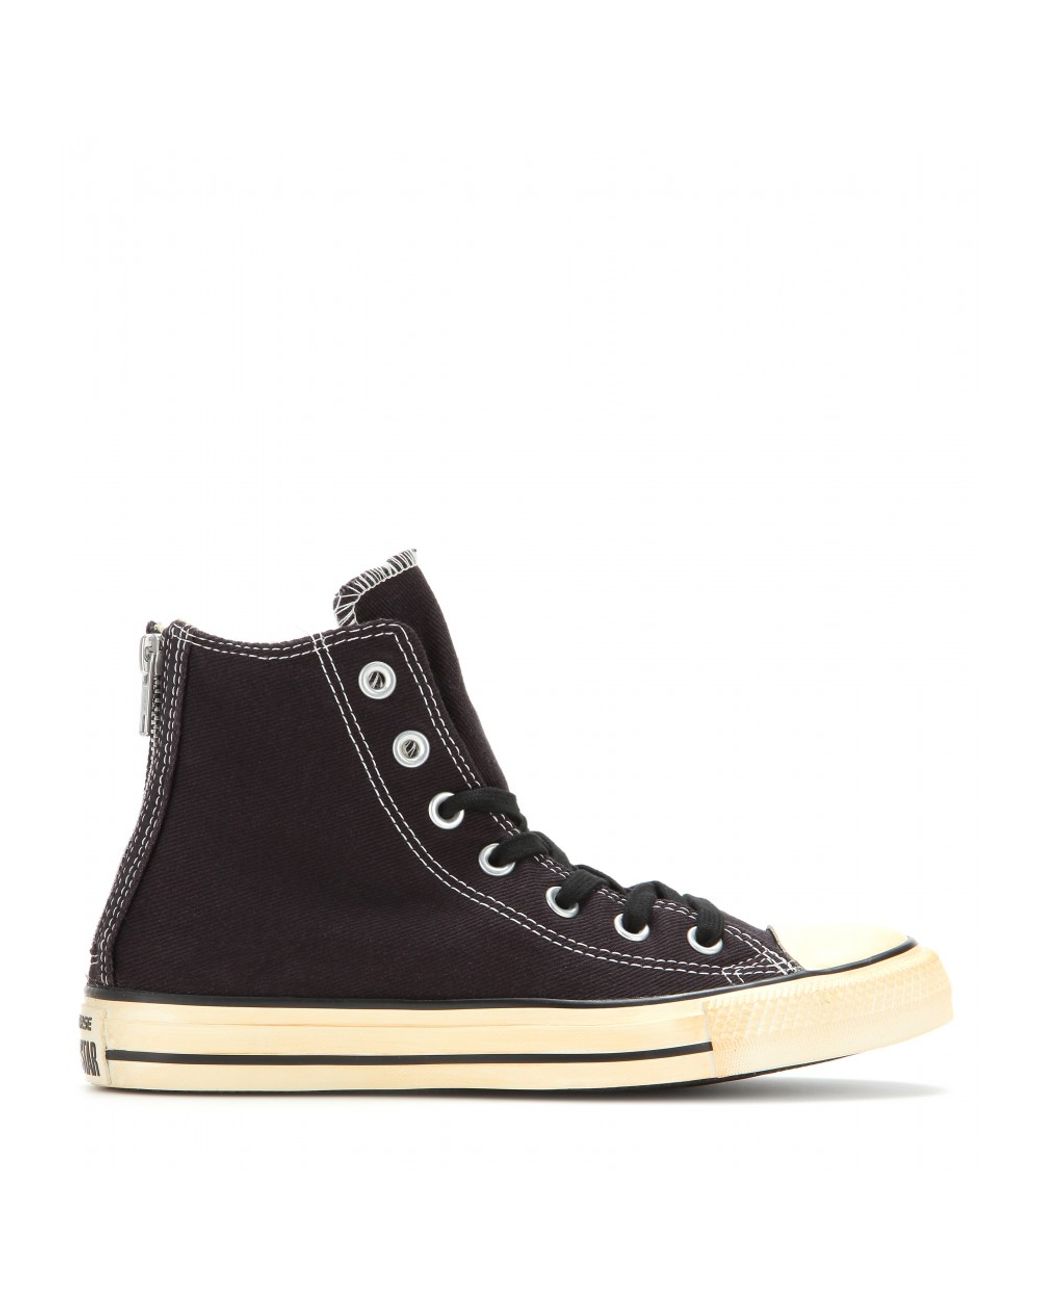 Converse Chuck Taylor Back Zip High-Top Sneakers in Black